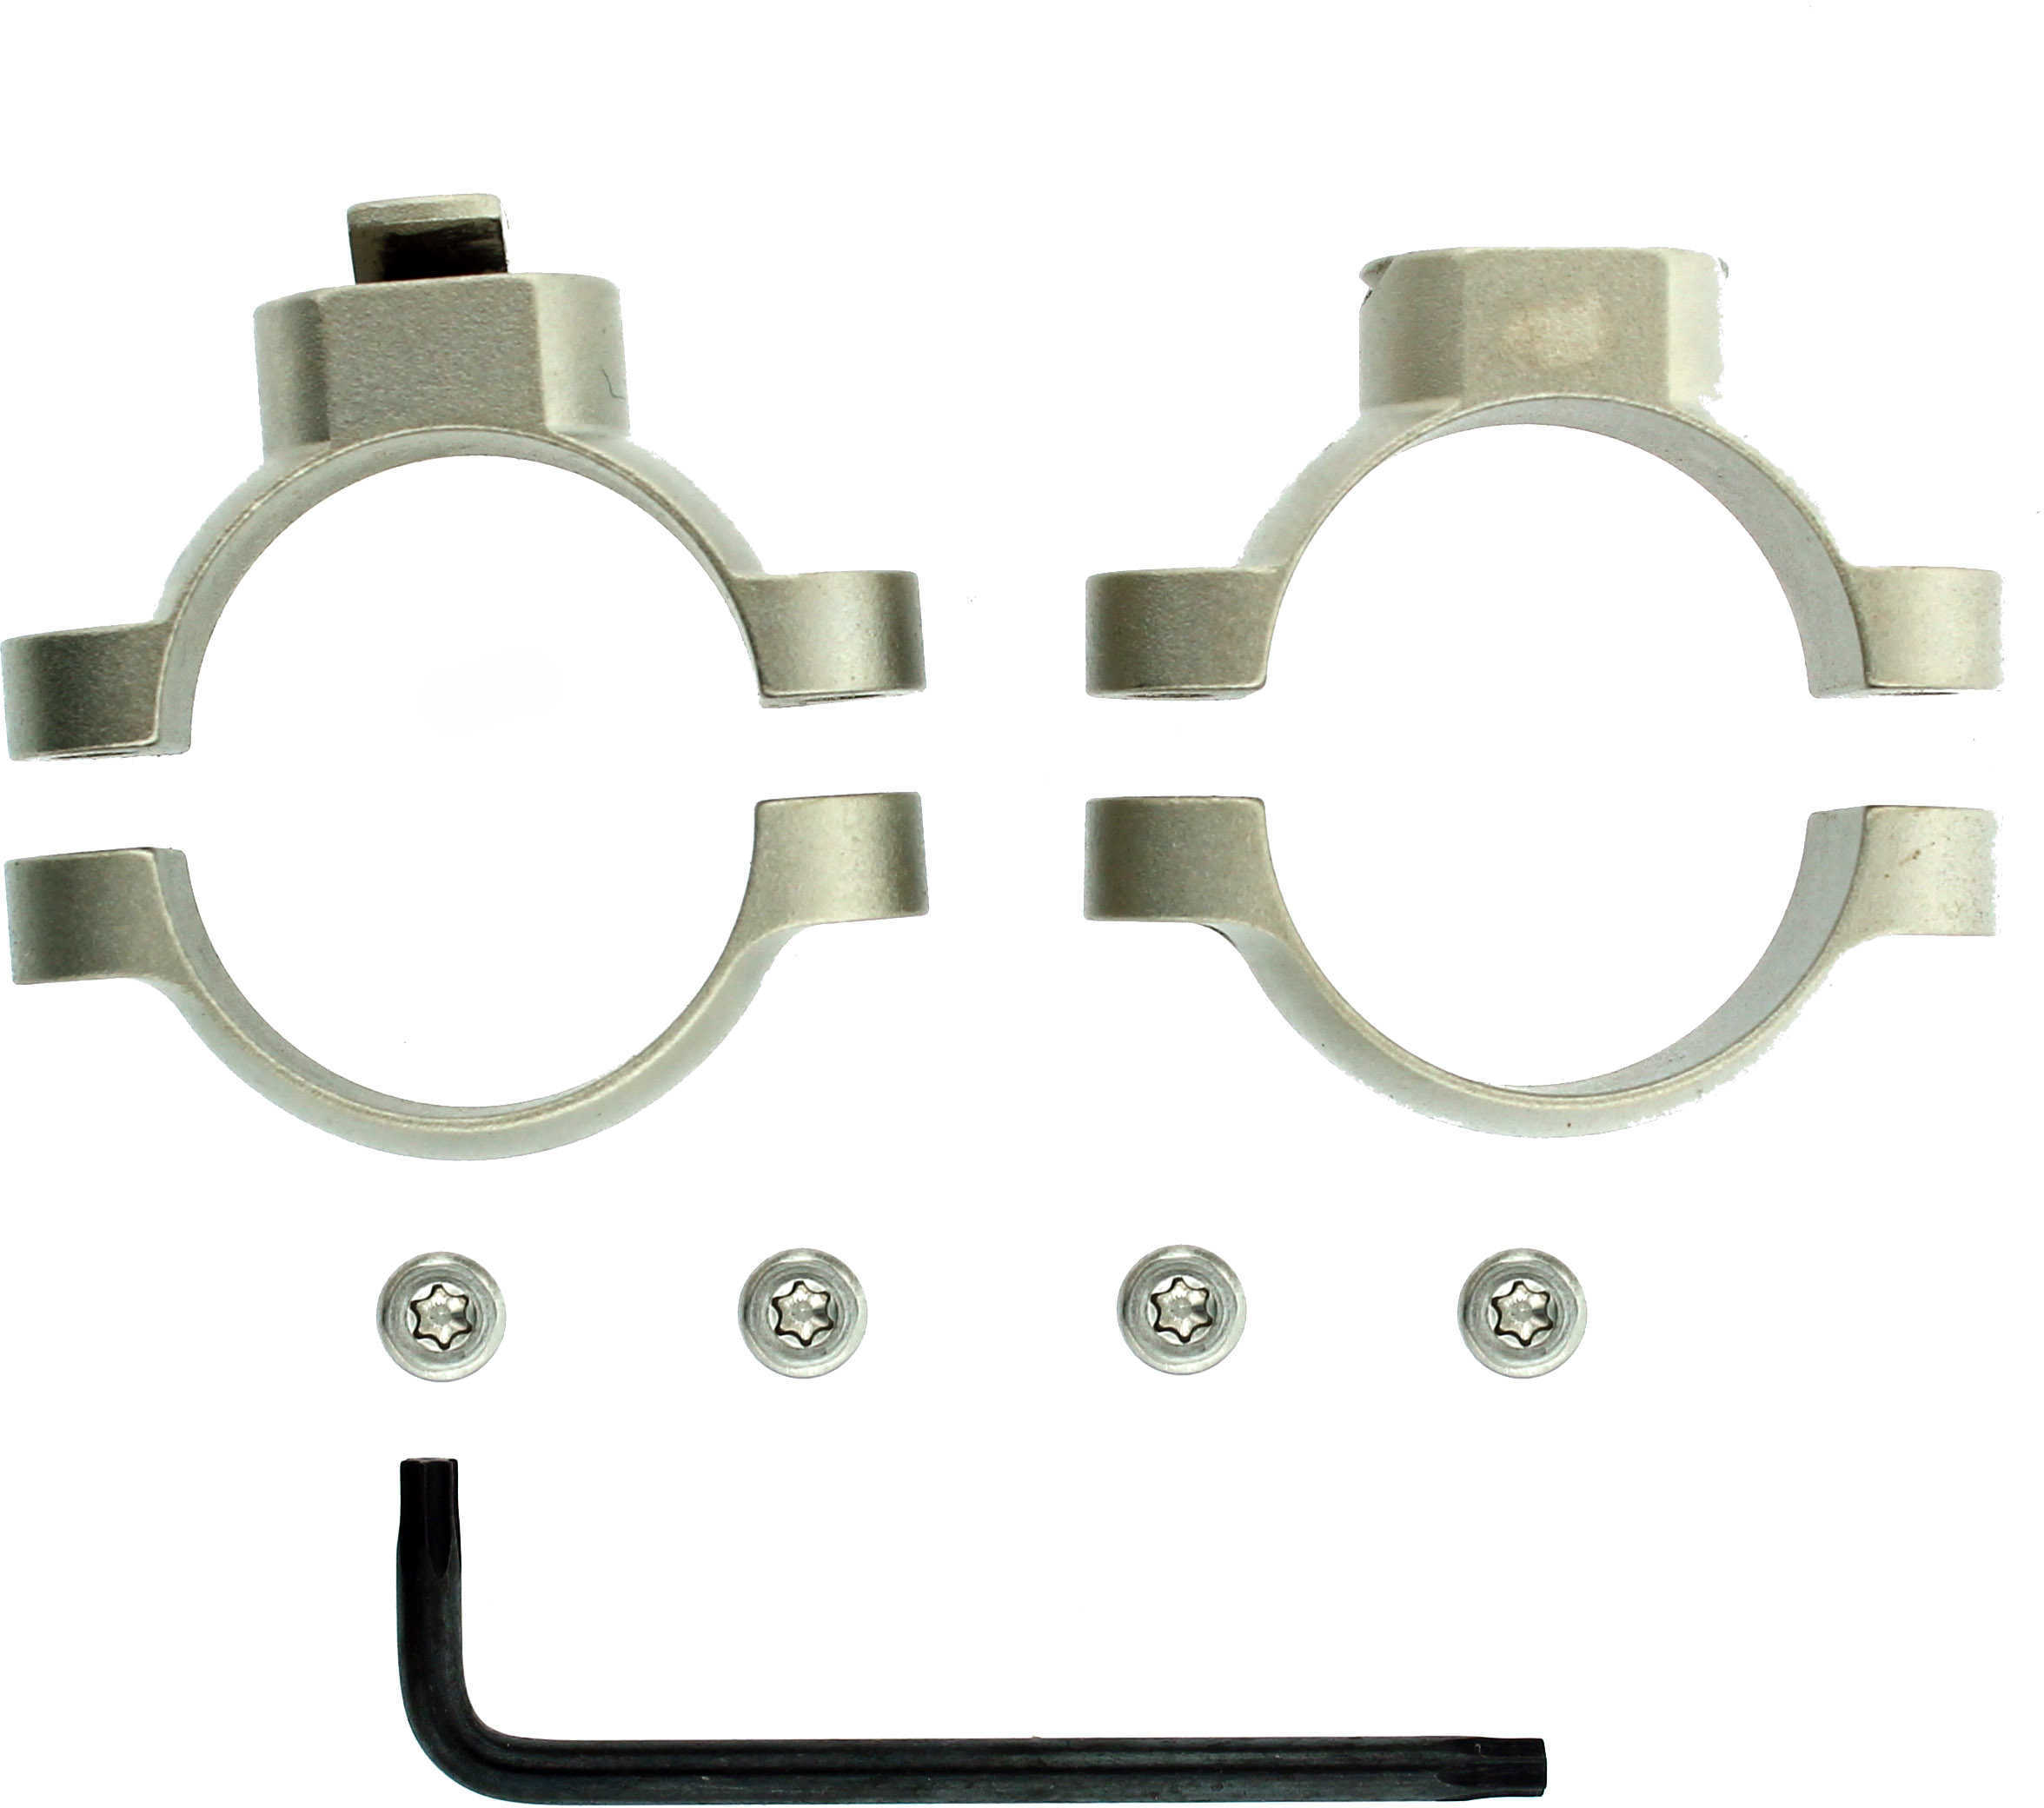 Leupold 30MM High Rings With Silver Finish Md: 52495